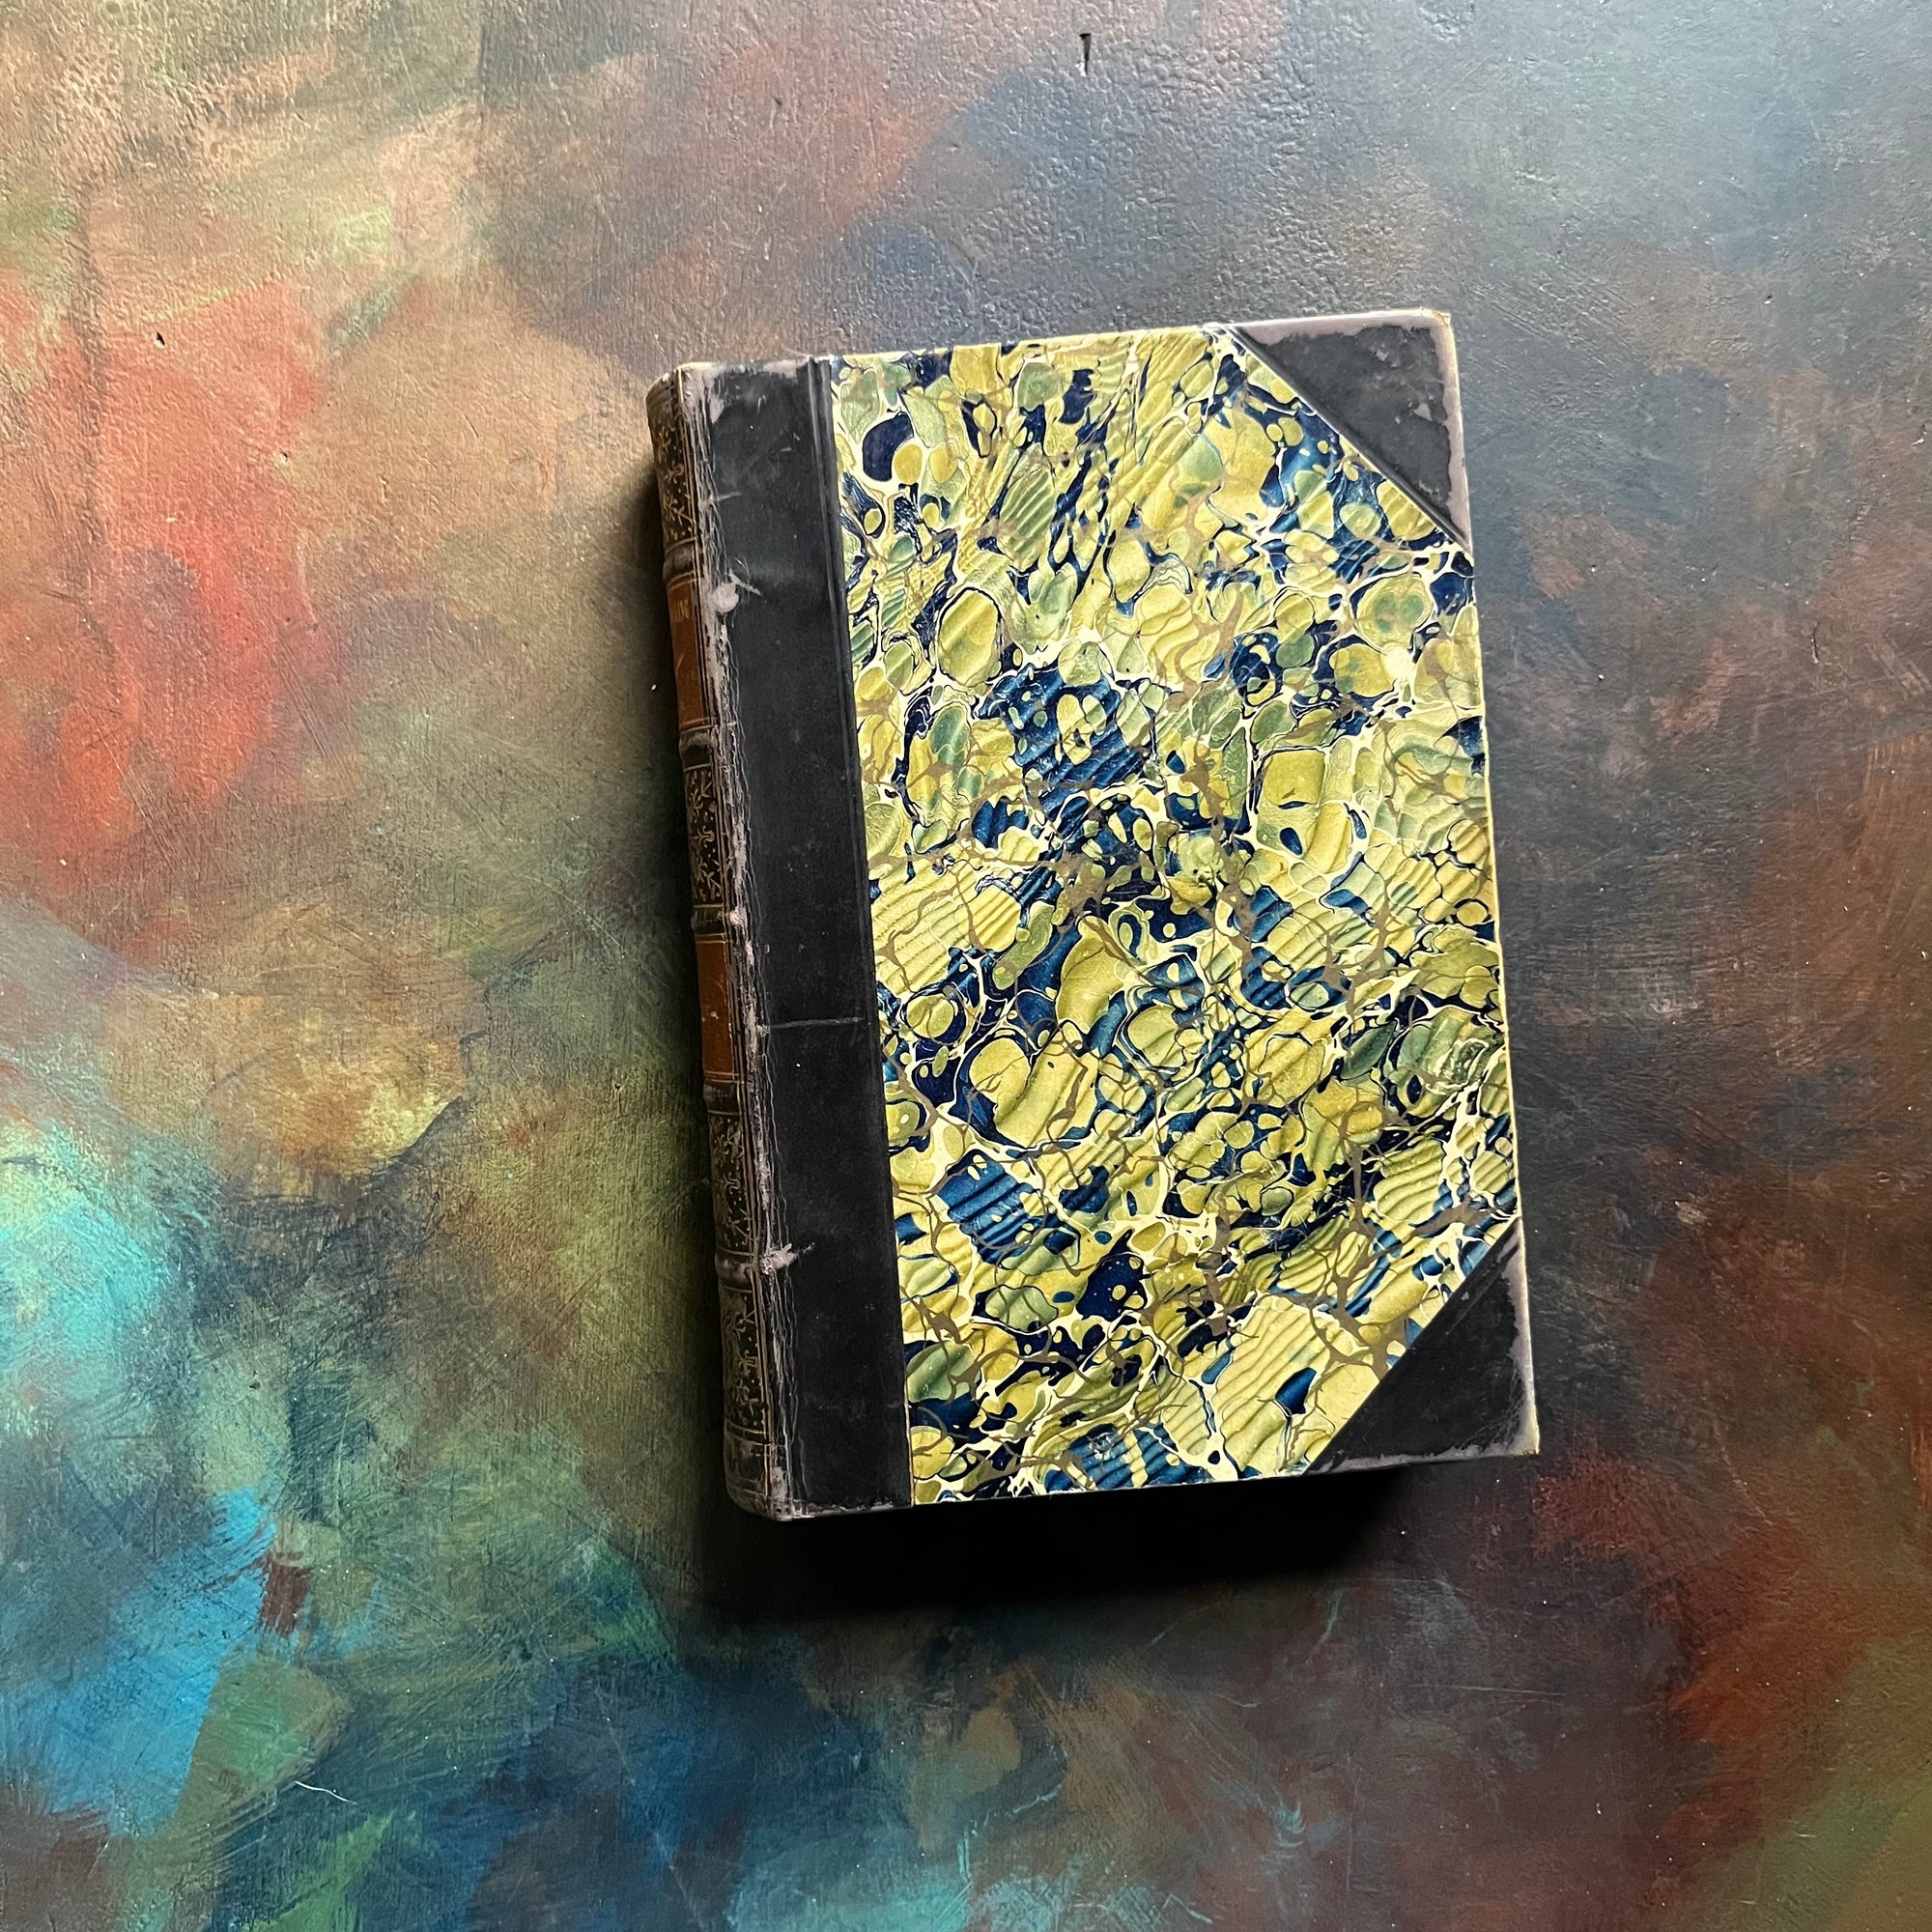 The Prairie written by James Fenimore Cooper-book one of the leather stocking tales-antique leather-bound book with marbled cover-vintage adventure book-view of the front cover